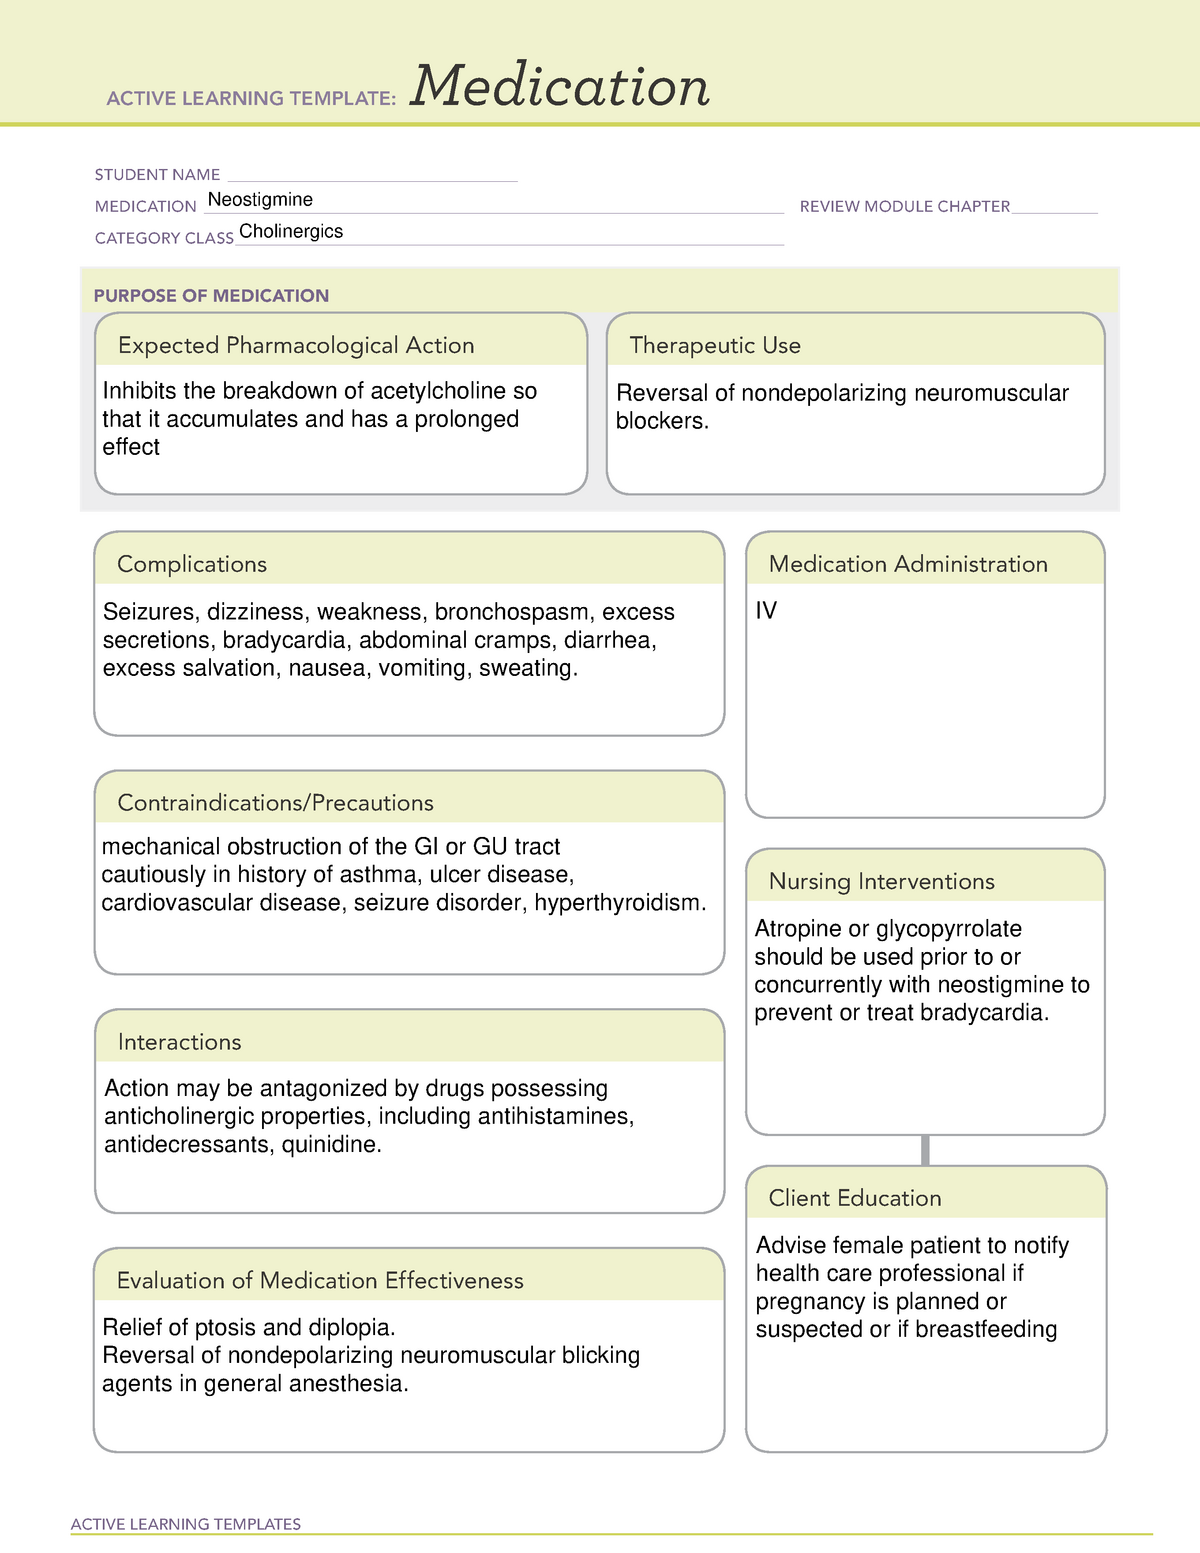 active-learning-template-medication